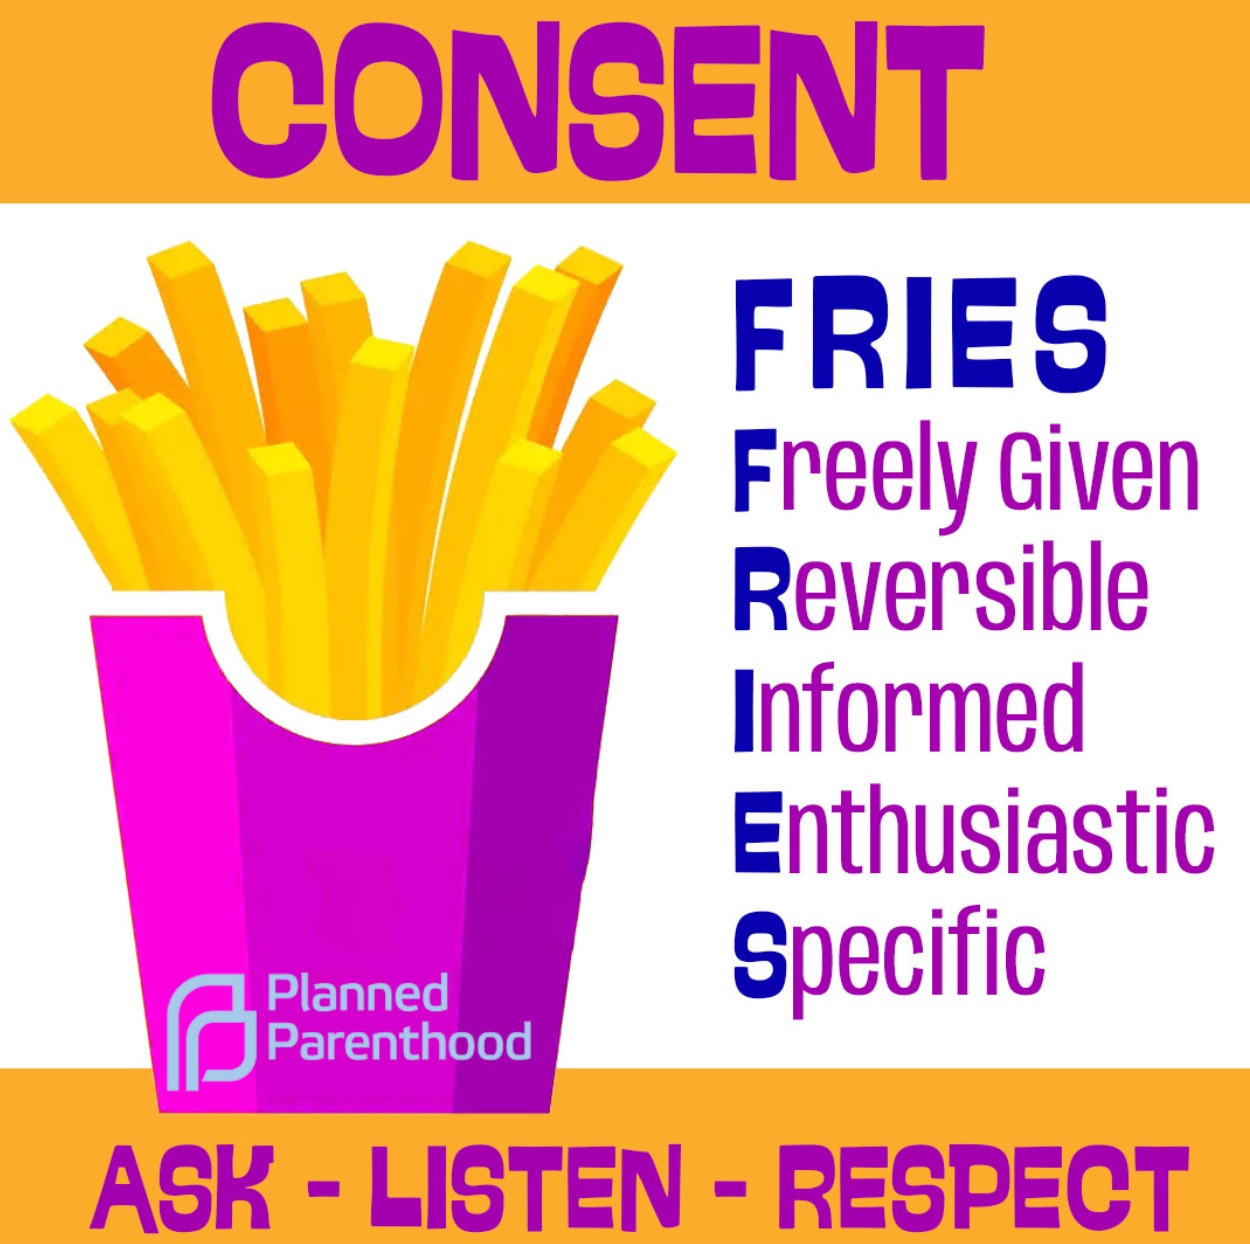 Consent FRIES acronym. It stands for Freely Given, Reversible, Informed, Enthusiastic, and Specific